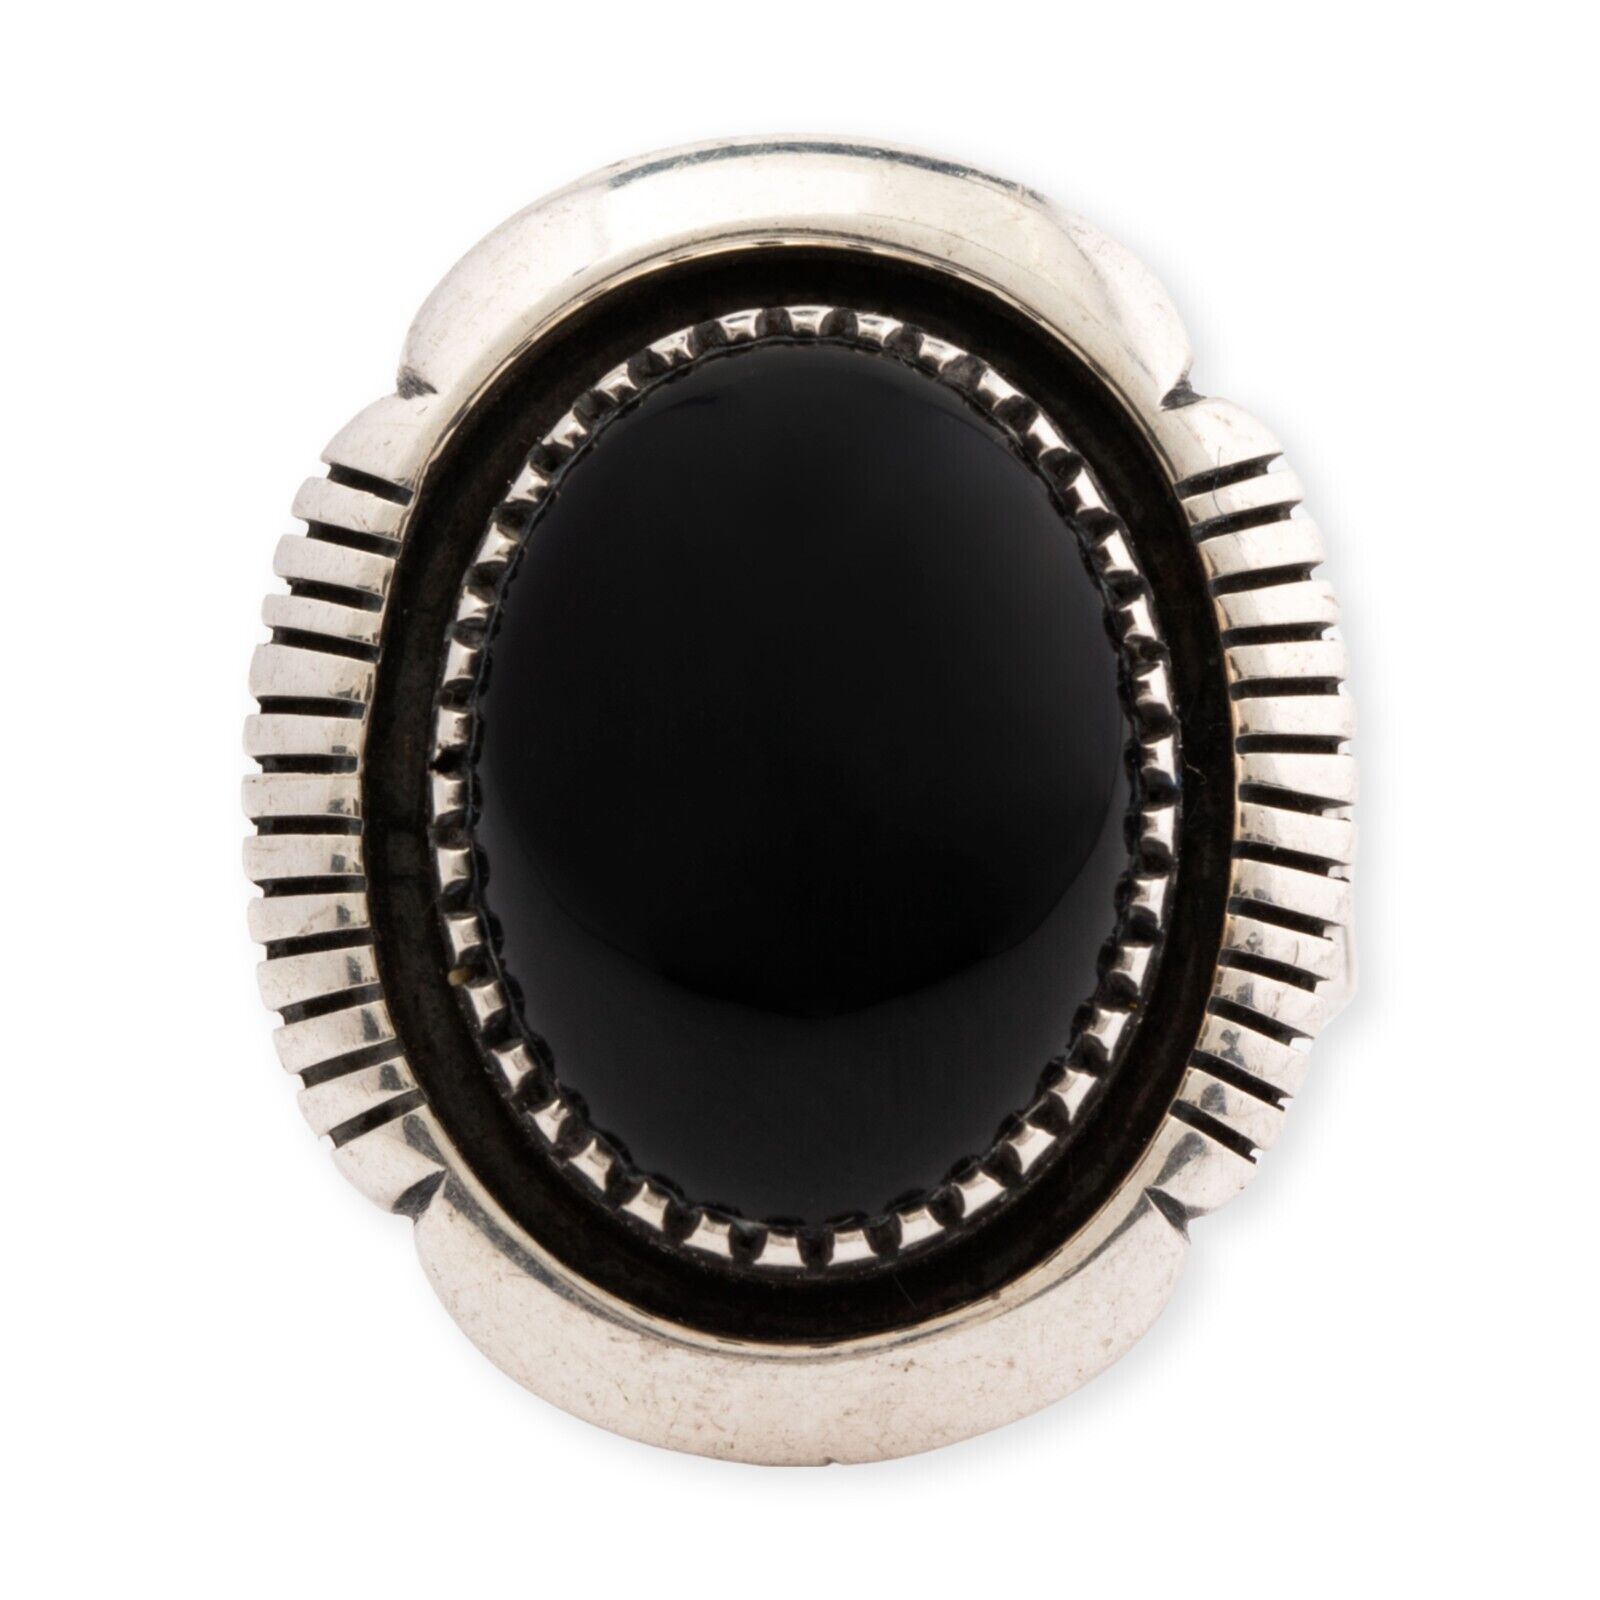 NATIVE MIKE STERLING SILVER BLACK ONYX FILE WORK RING 7